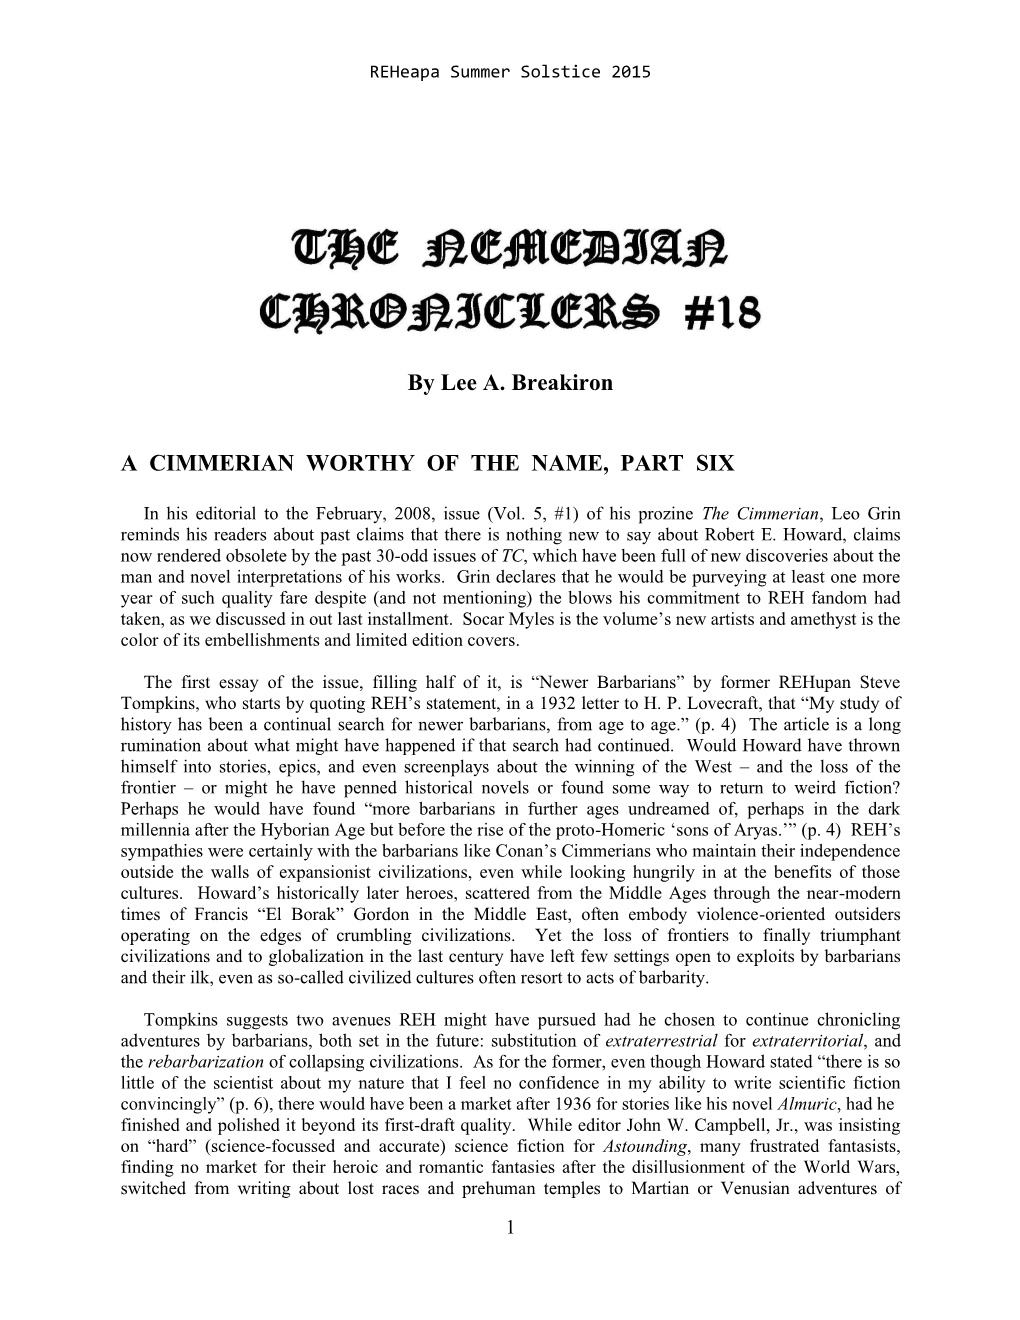 The Nemedian Chroniclers #18 [SS15]